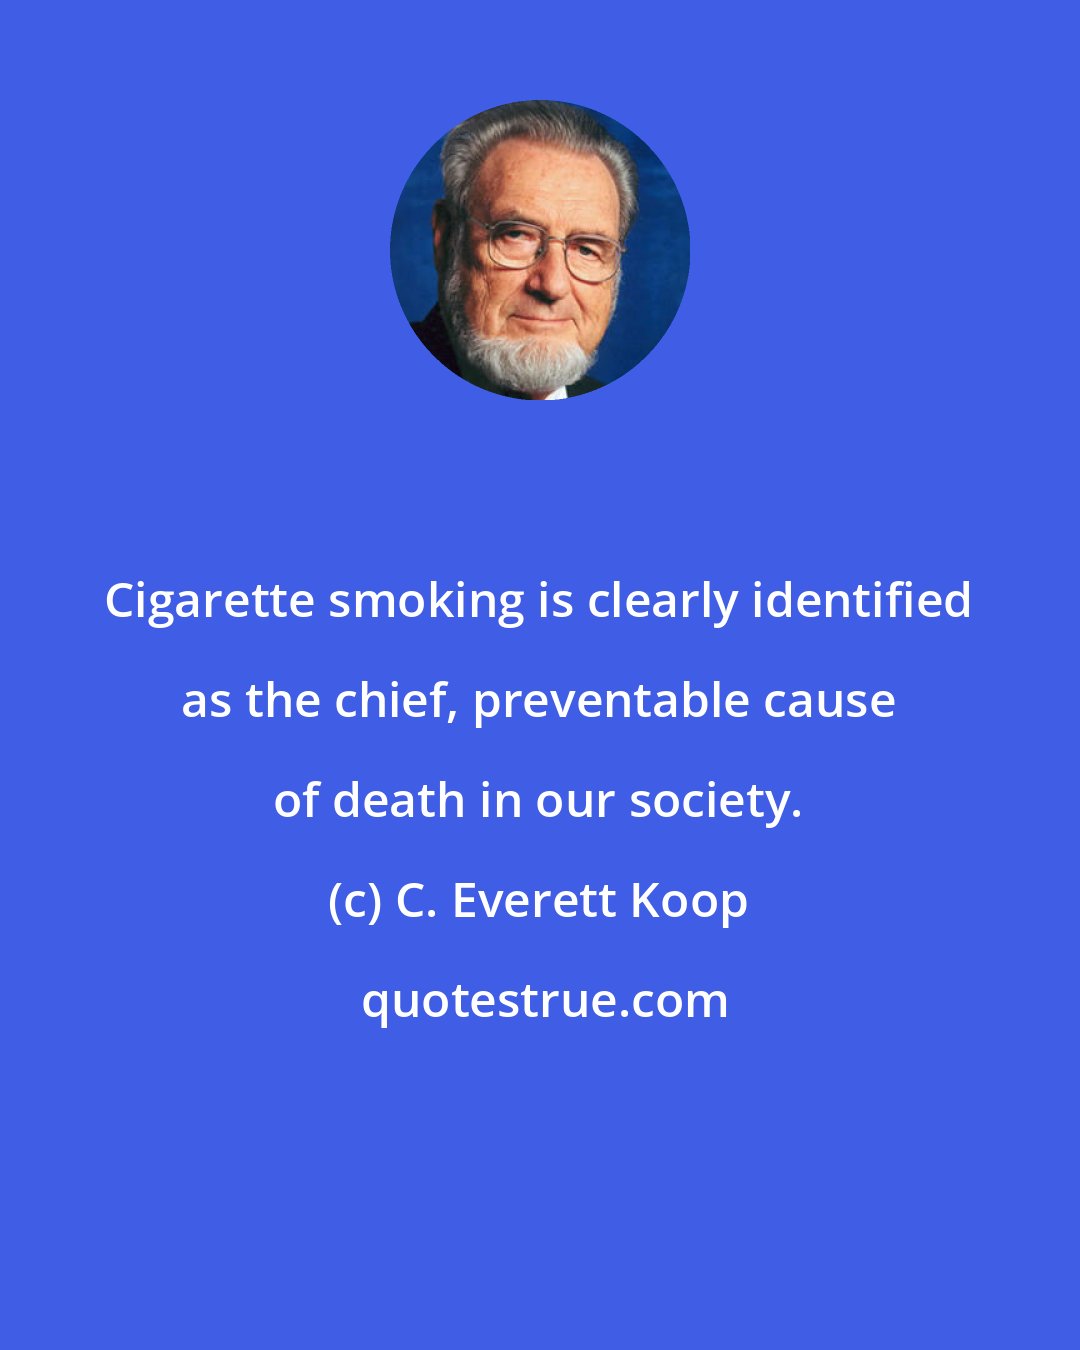 C. Everett Koop: Cigarette smoking is clearly identified as the chief, preventable cause of death in our society.